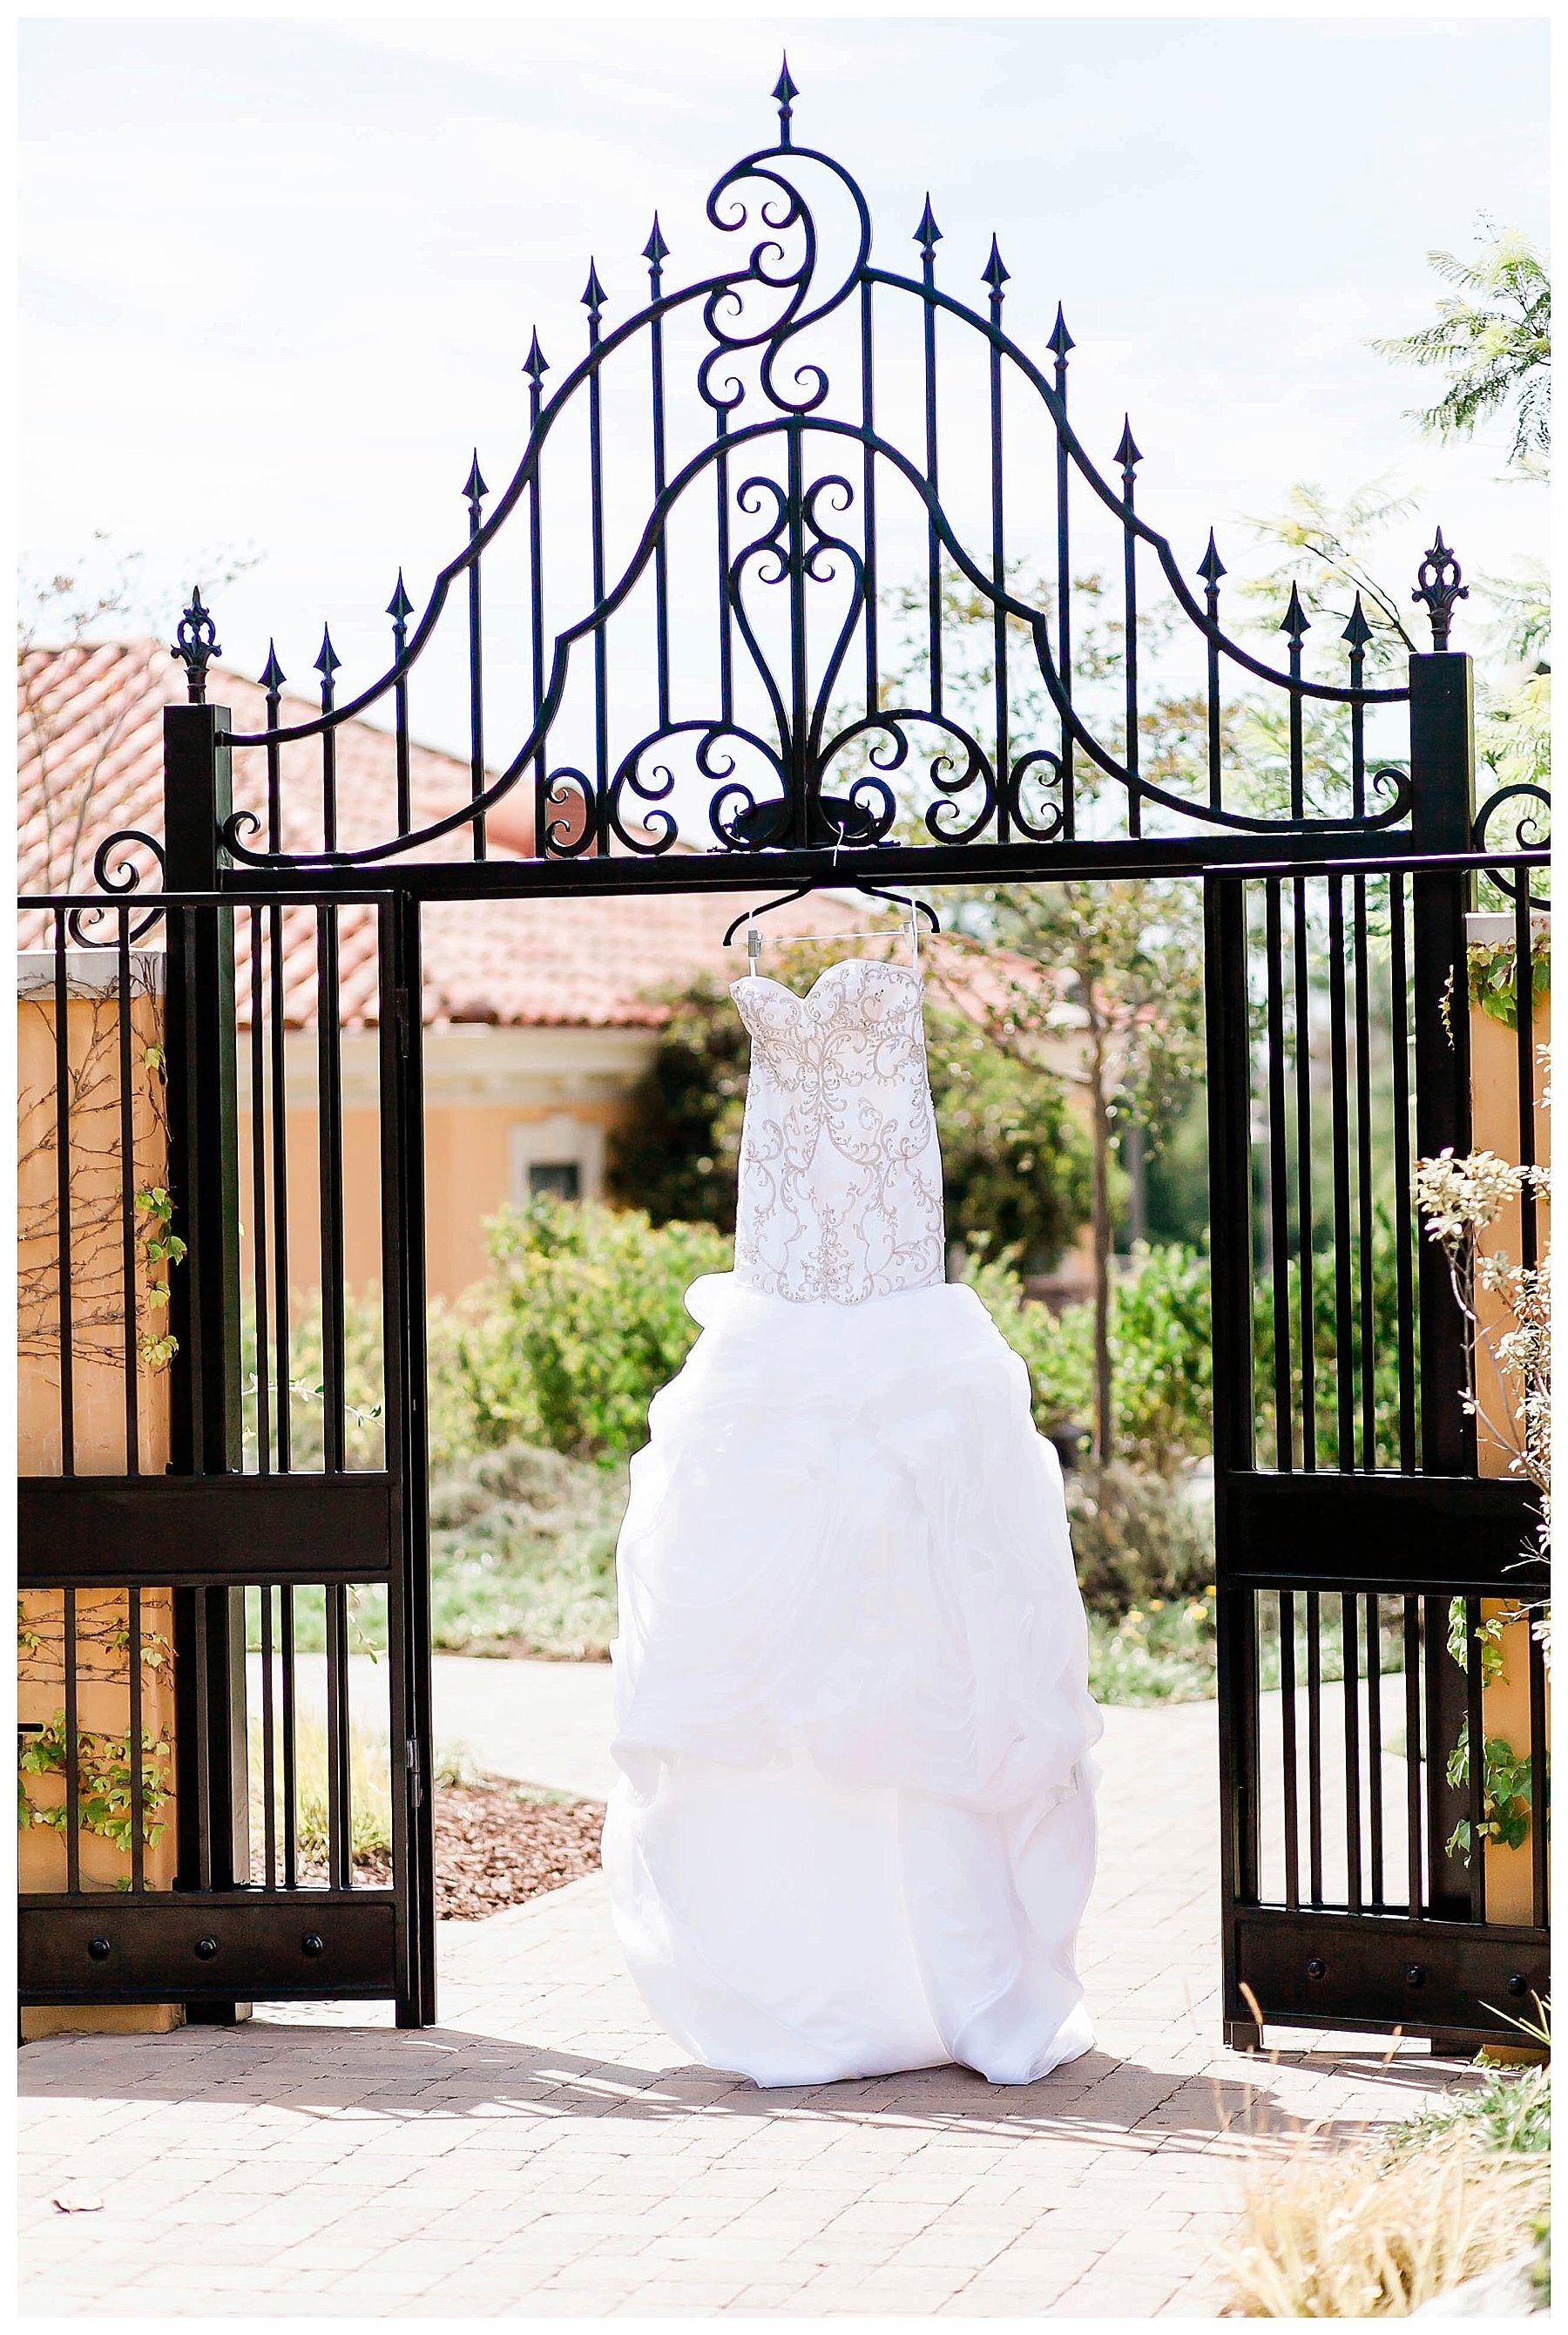  bride’s gown handing on the gate entrance 